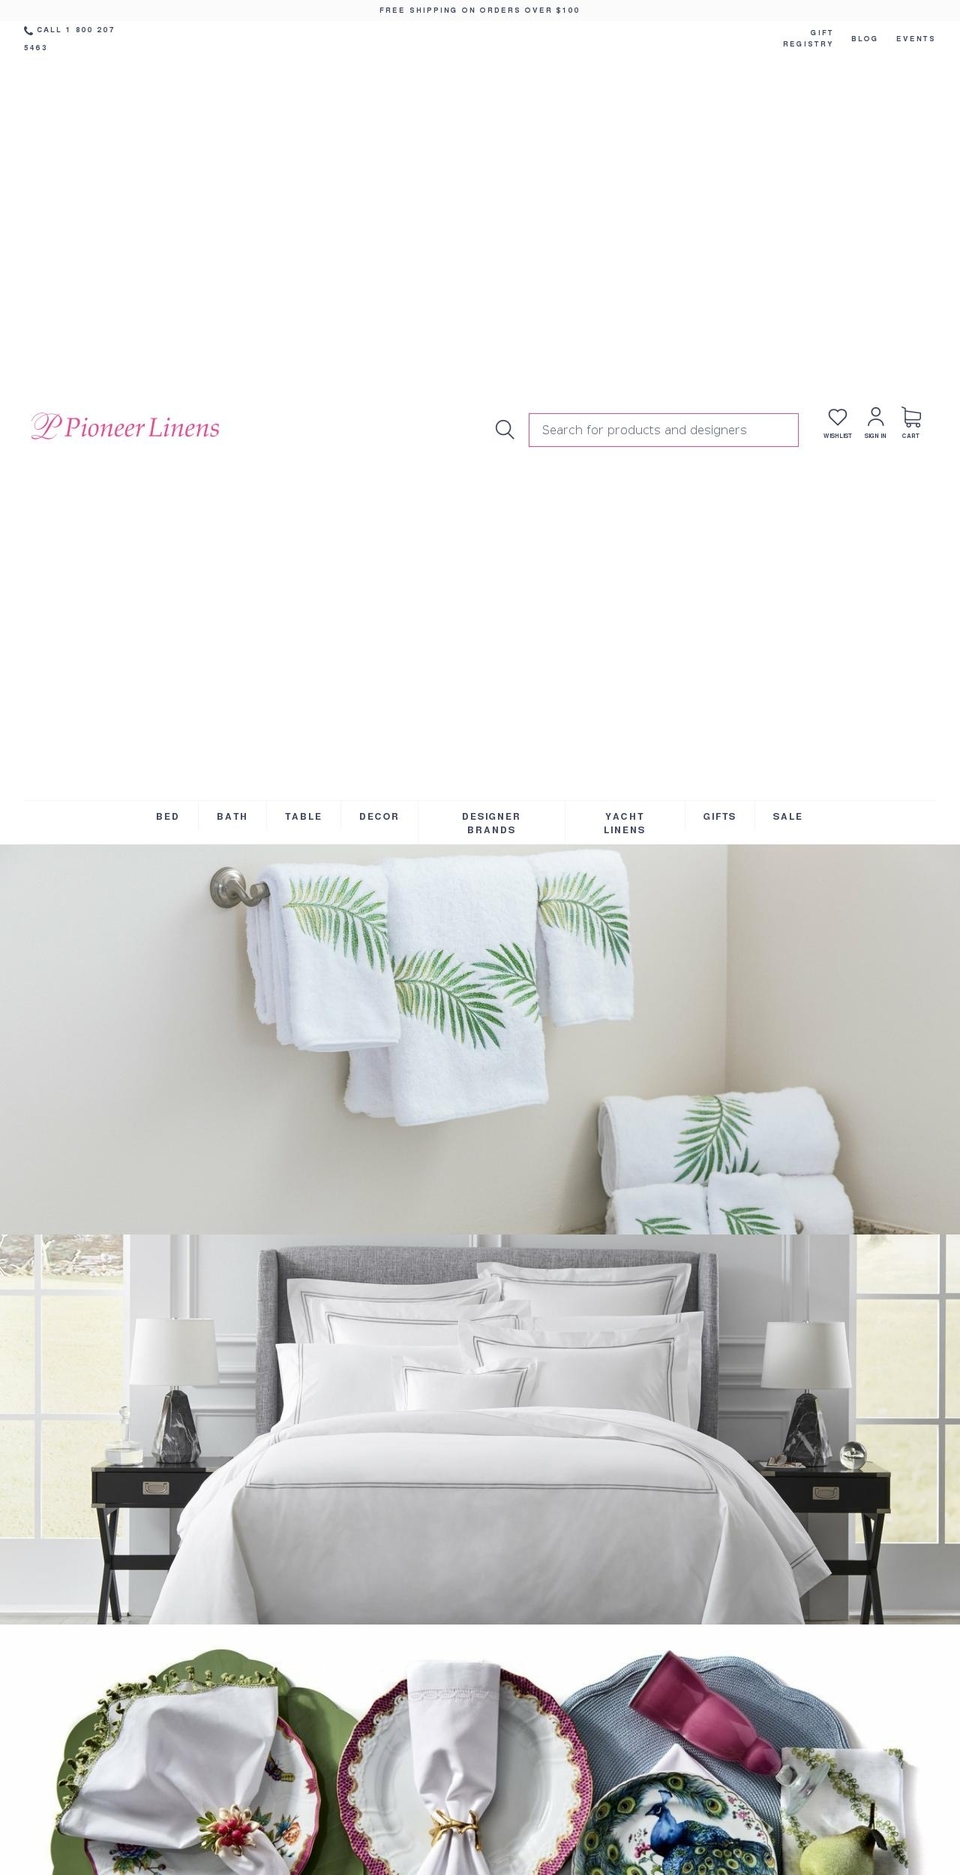 Buko Shopify Theme - Products Consolidation Shopify theme site example pioneerlinnens.com